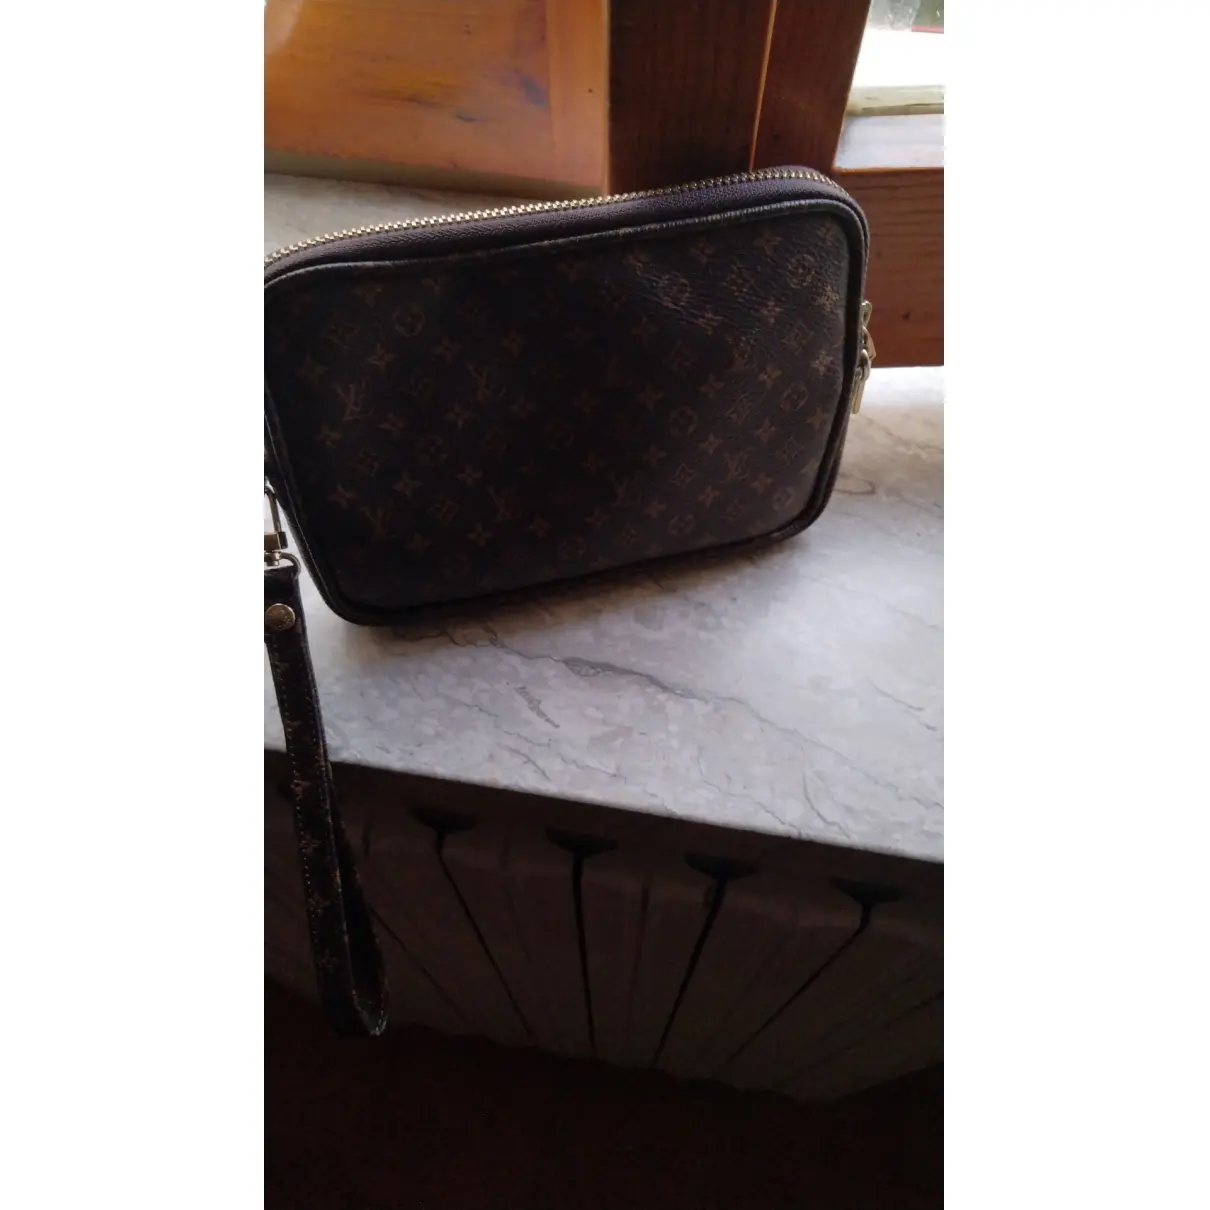 Buy Louis Vuitton Orsay leather clutch bag online